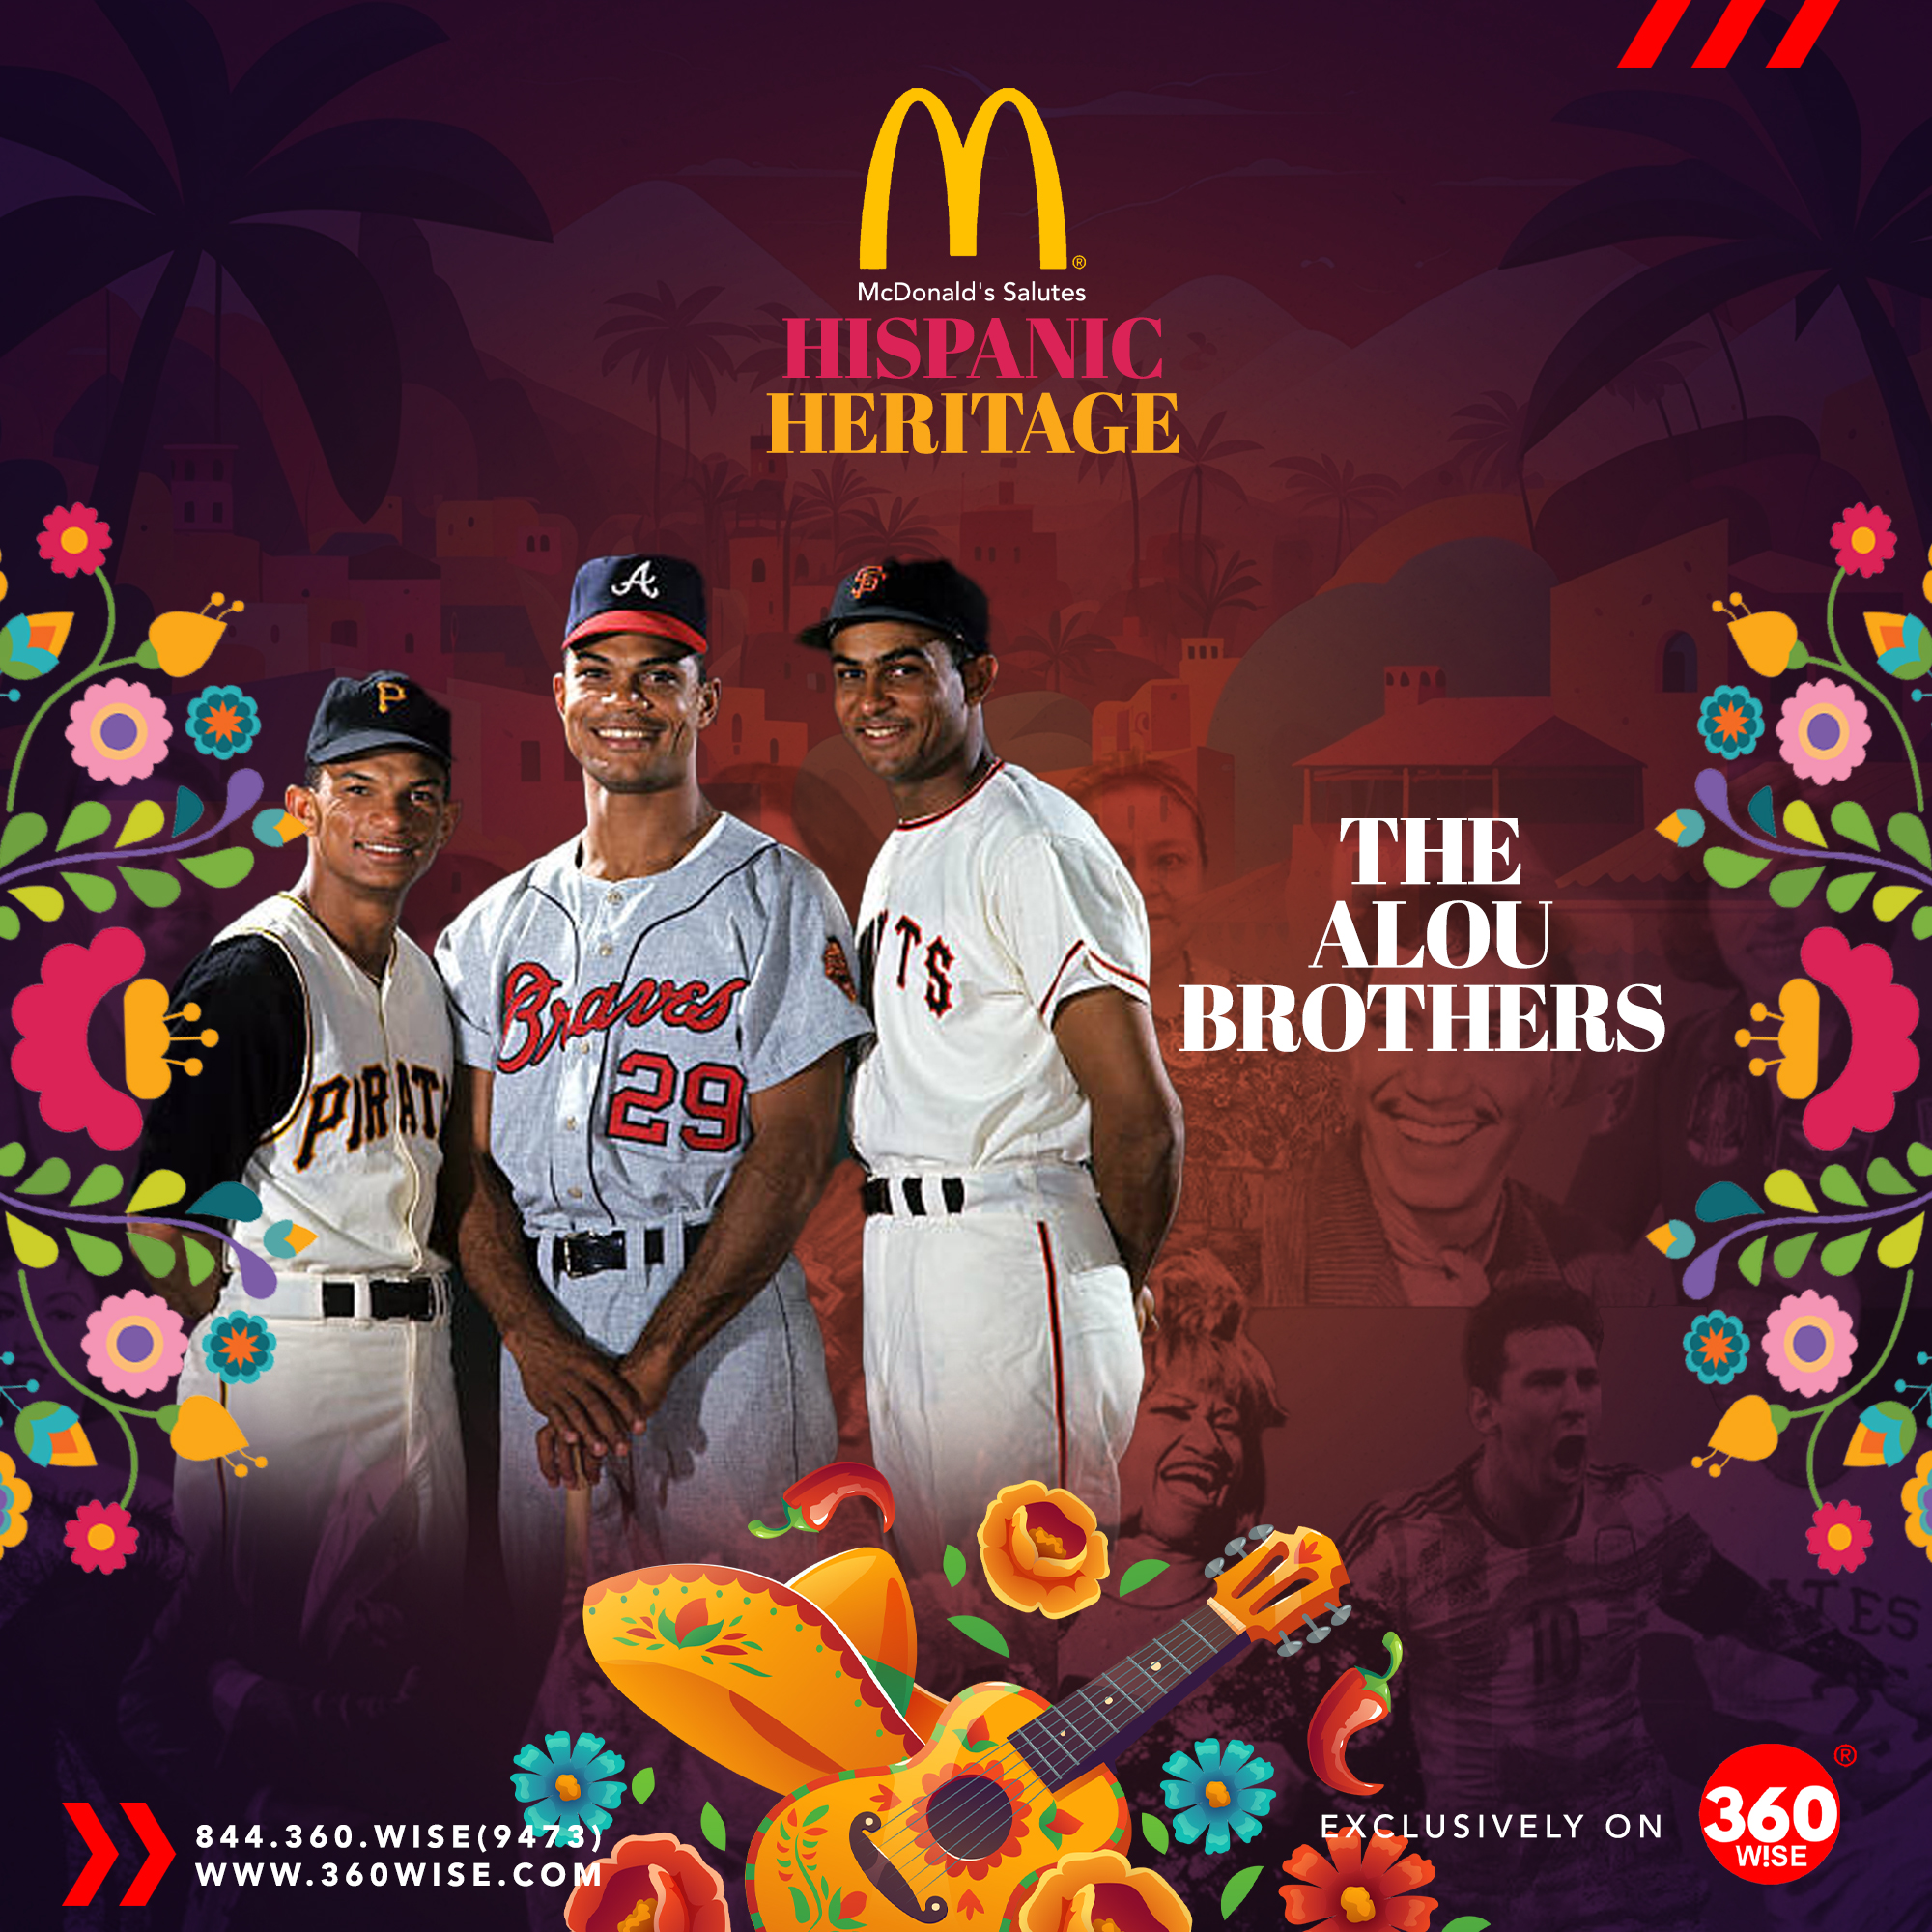 The Alou Brothers